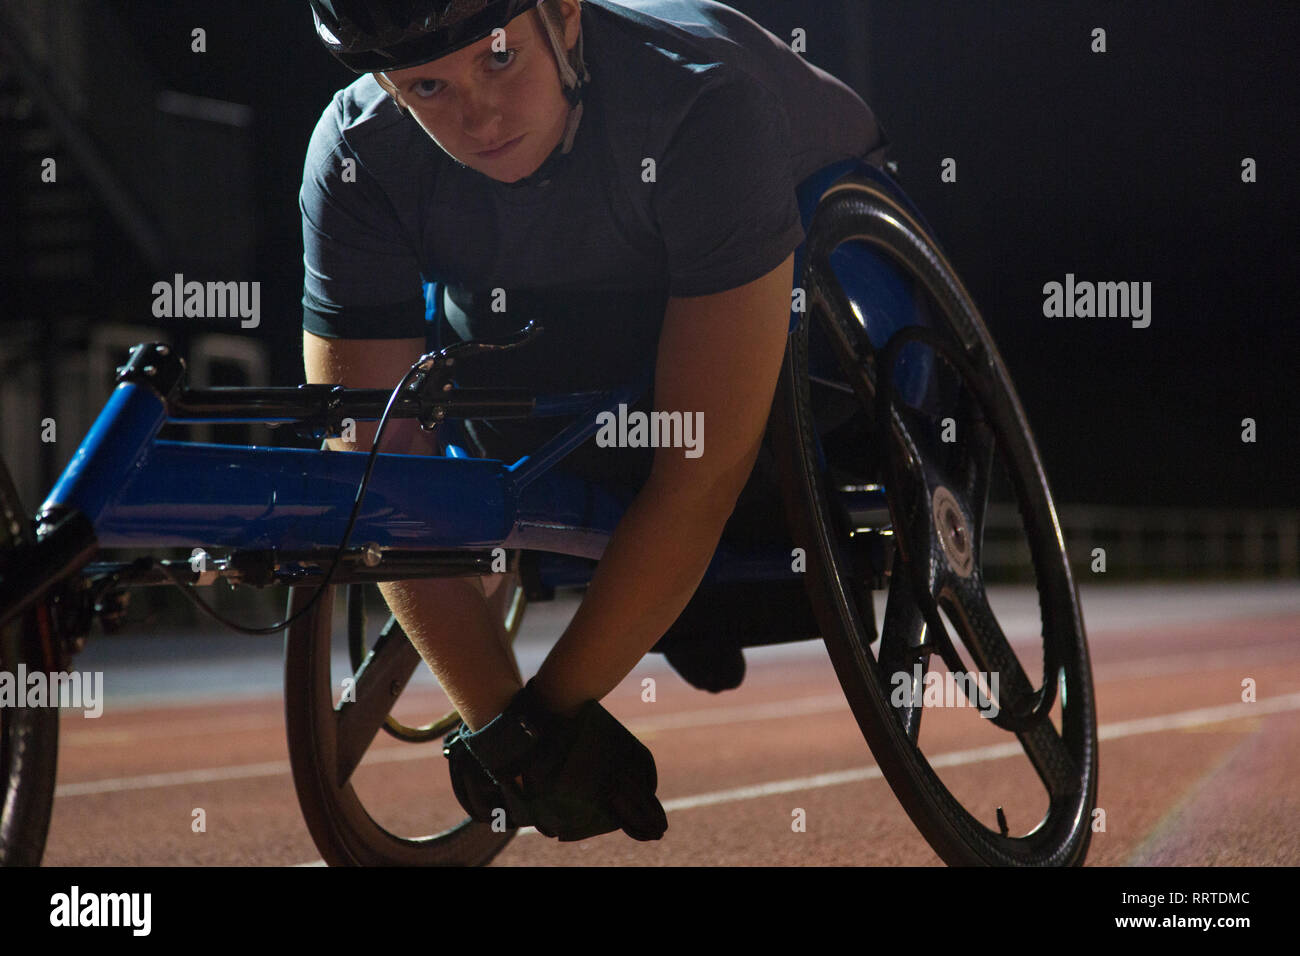 Portrait determined young female paraplegic athlete training for wheelchair race on sports track at night Stock Photo